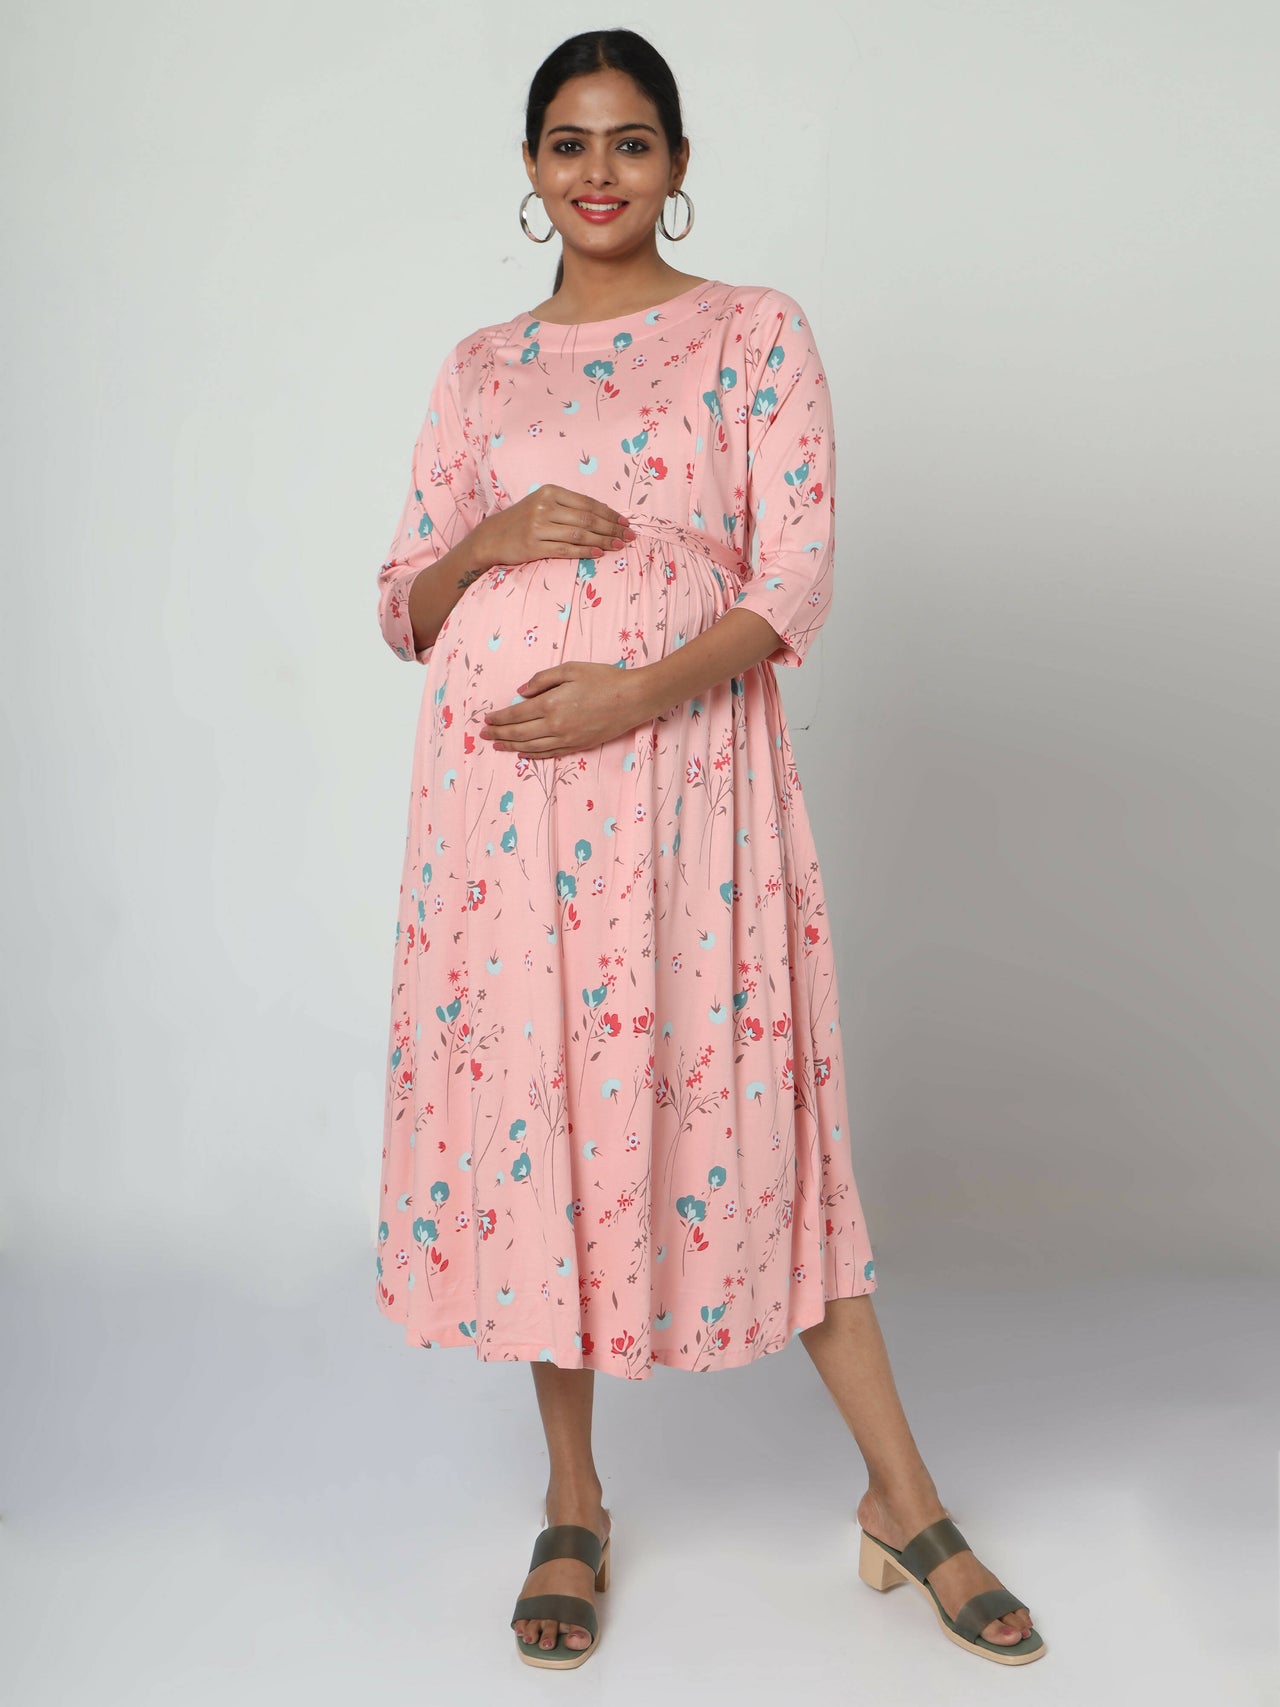 Manet Three Fourth Maternity Dress Floral Print With Concealed Zipper Nursing Access - Peach - Distacart